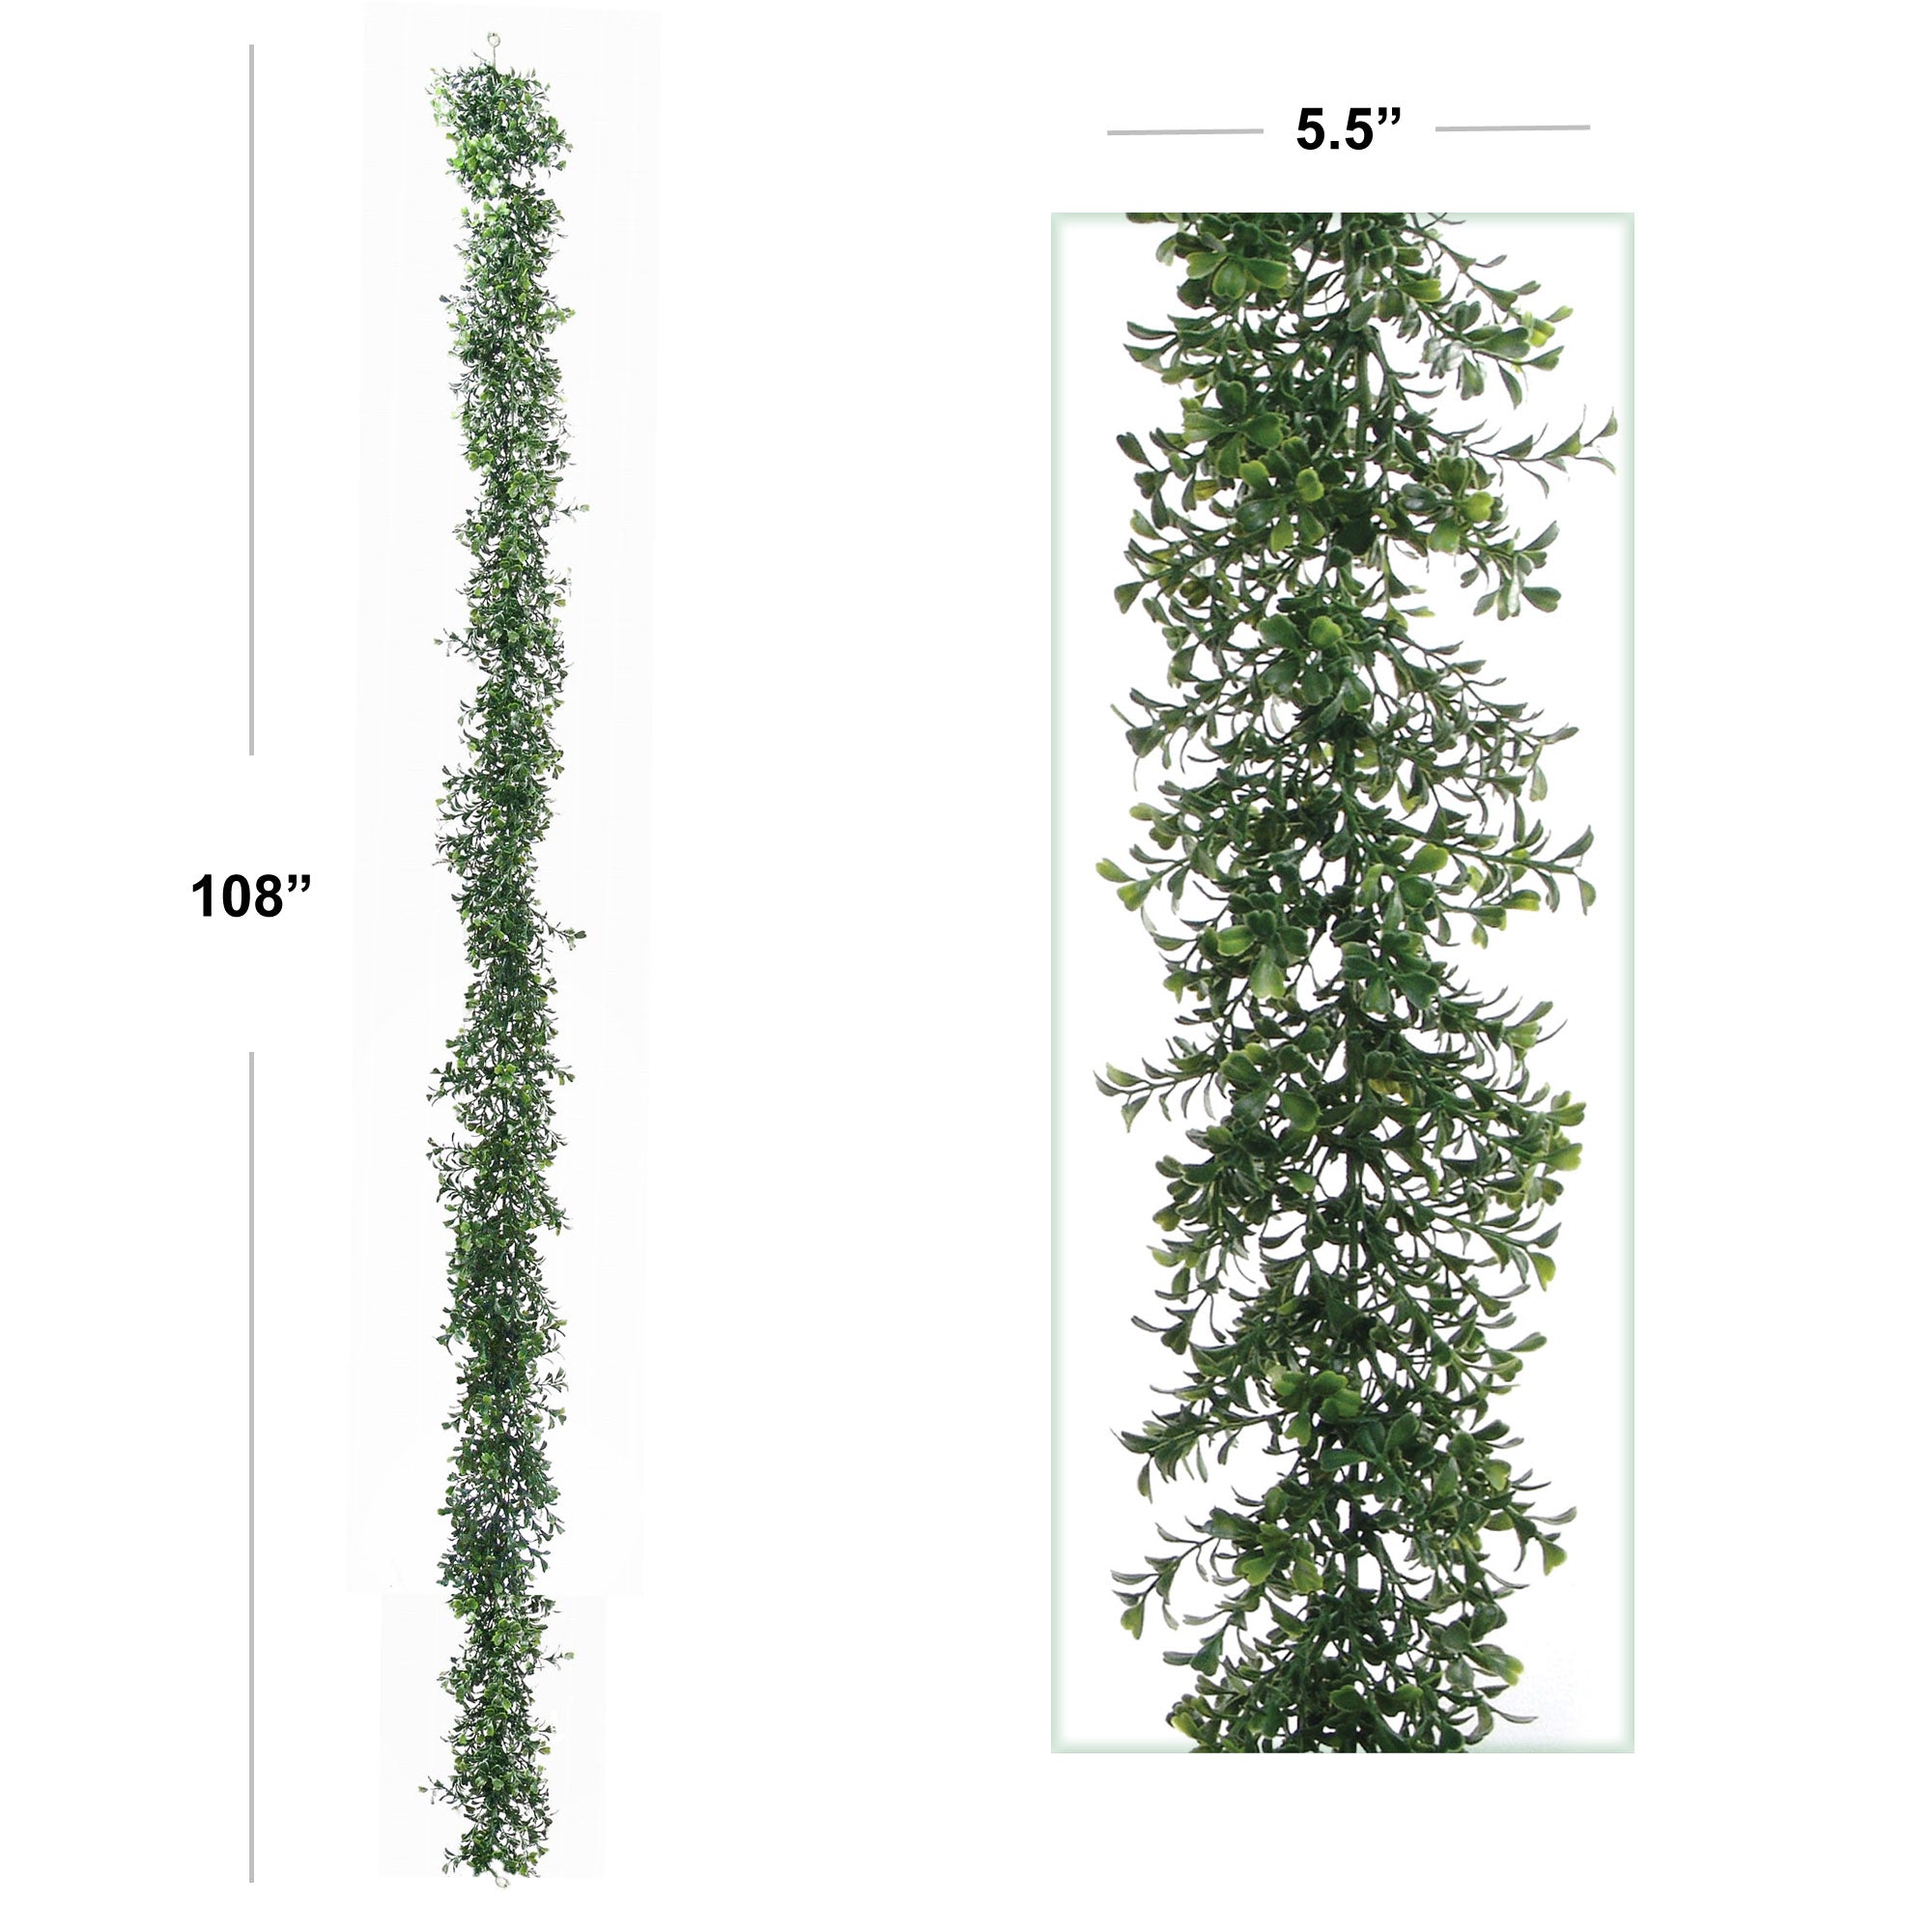 Lush 9' Boxwood Garland - Set of 6 - 760 Tips for Fullness - Ideal for Christmas Decor & Year-Round Greenery - Artificial & Realistic